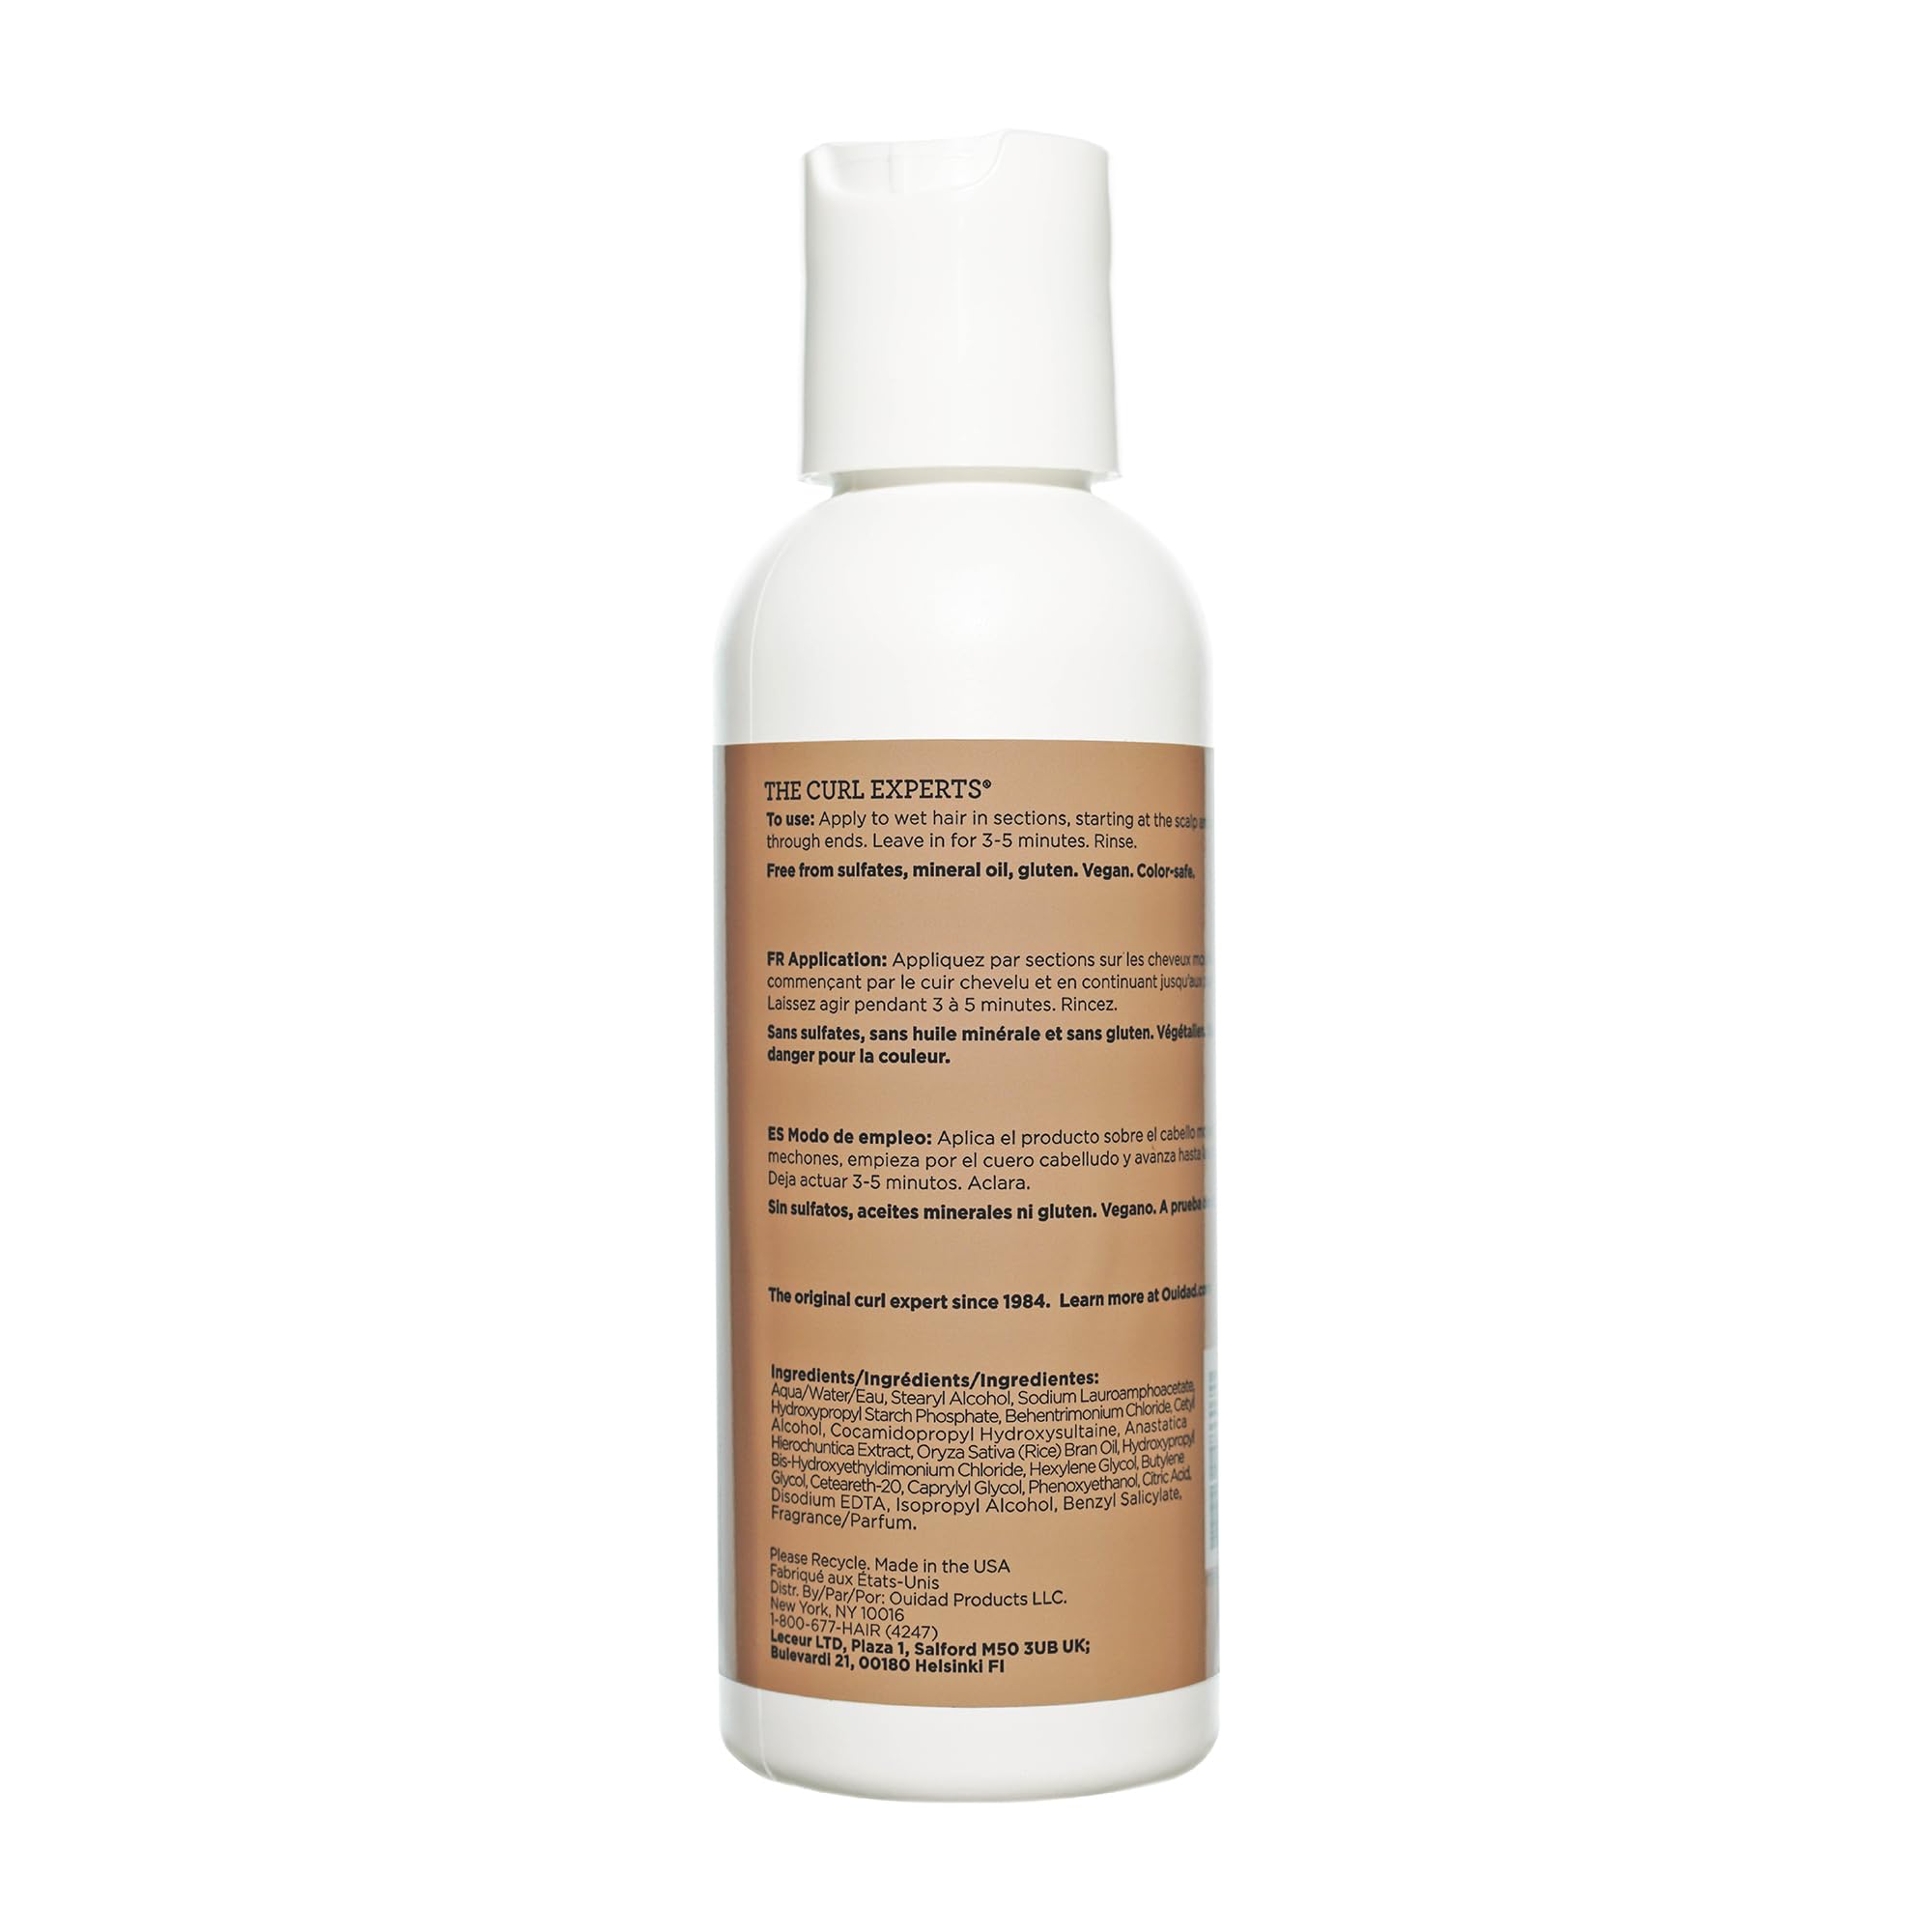 Ouidad Mini Curl Shaper Double Duty Cleansing Conditioner for Loose Curls and Waves - Sulfate Free - Travel Size 3.4oz